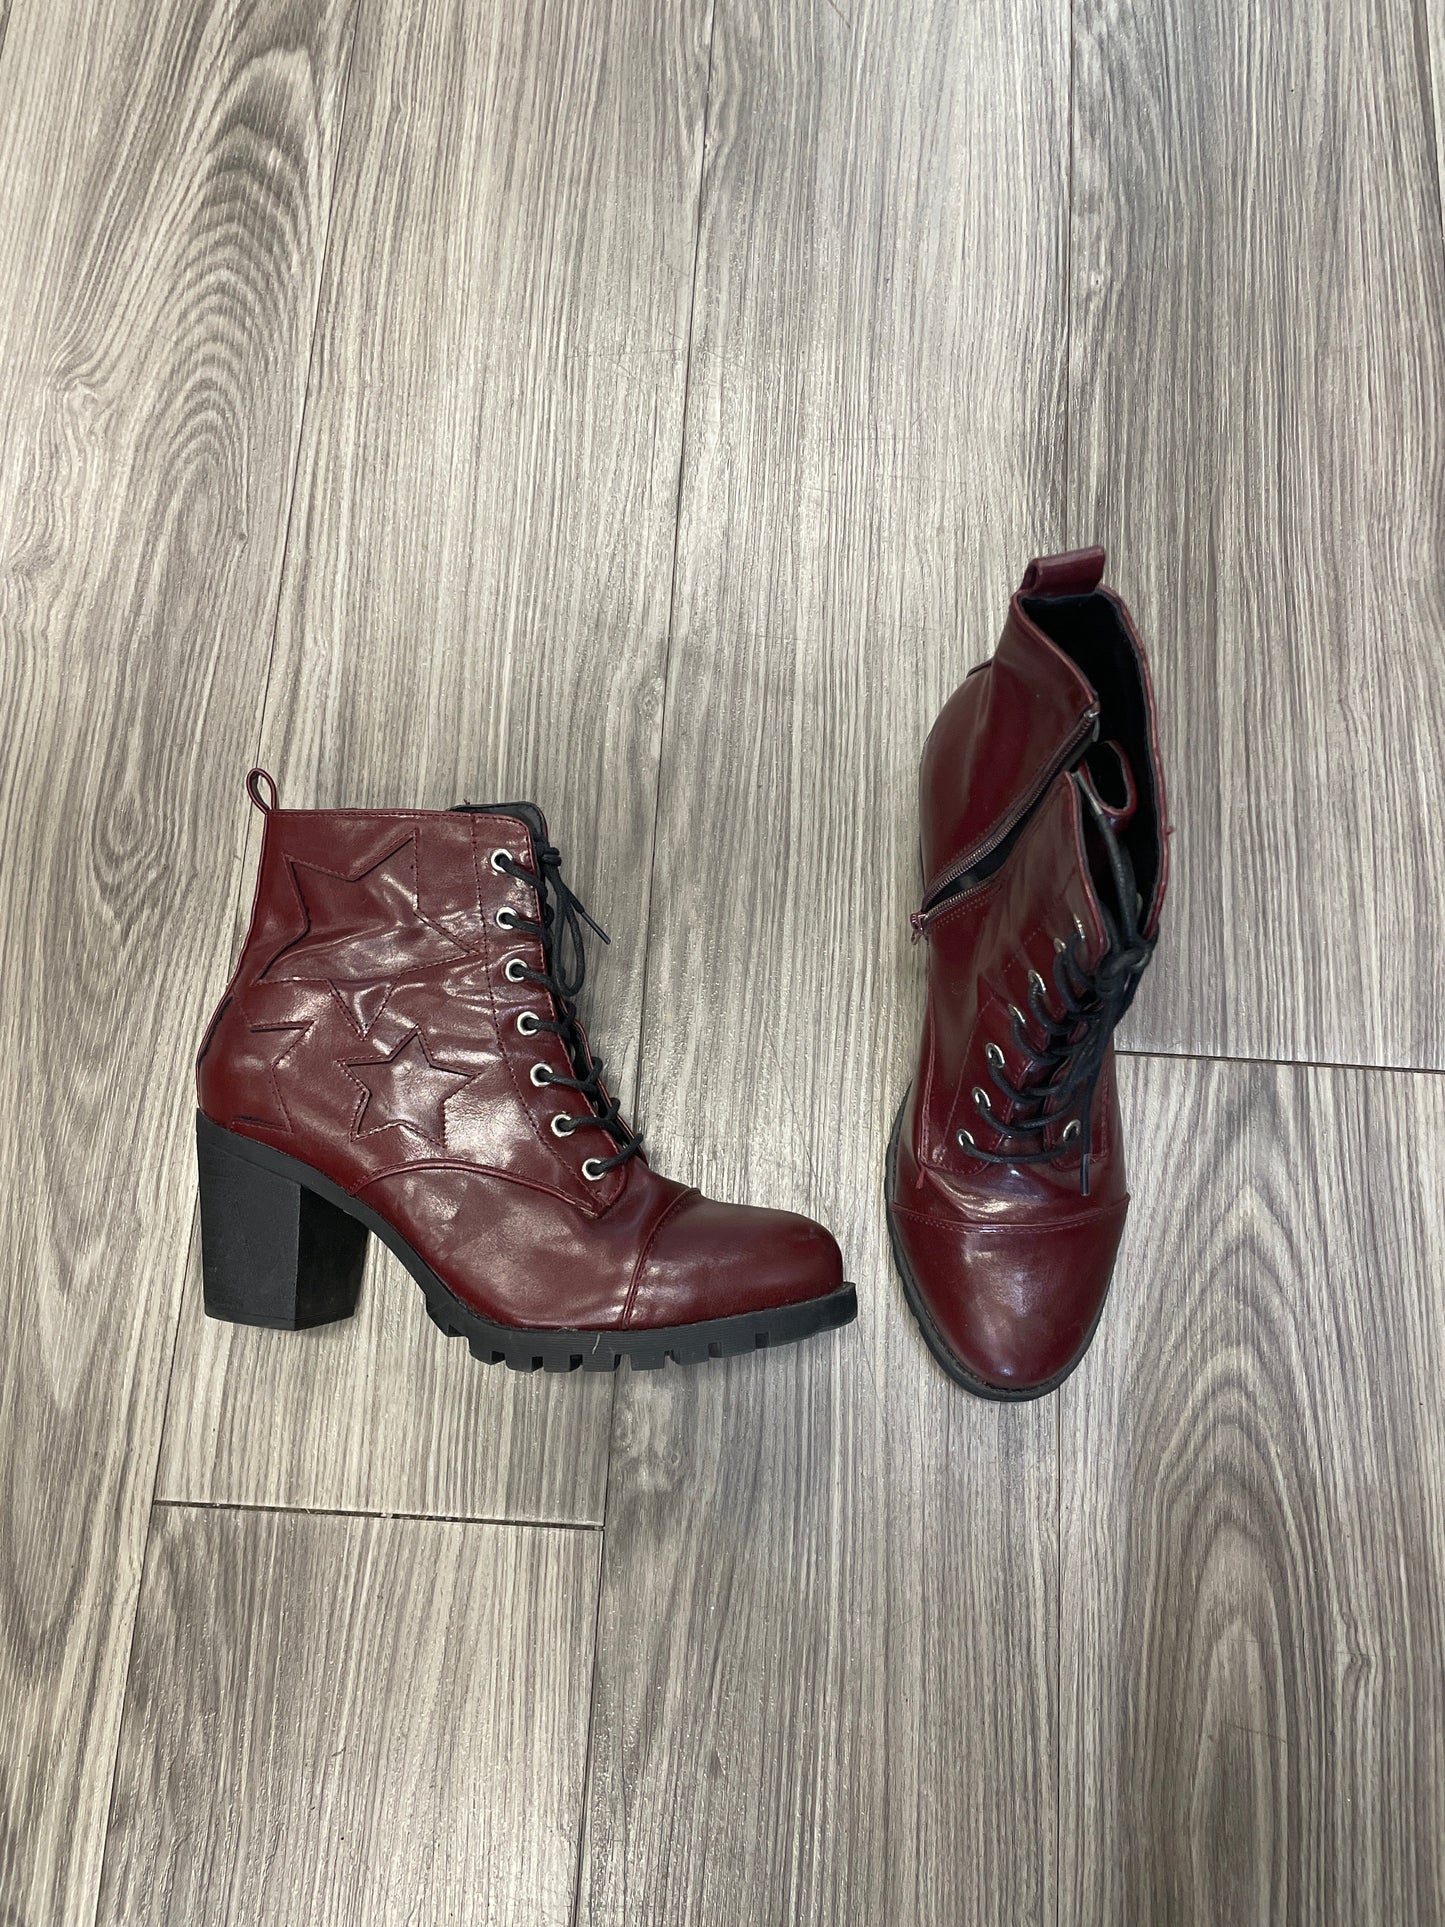 Black & Red Boots Combat Xoxo, Size 9.5